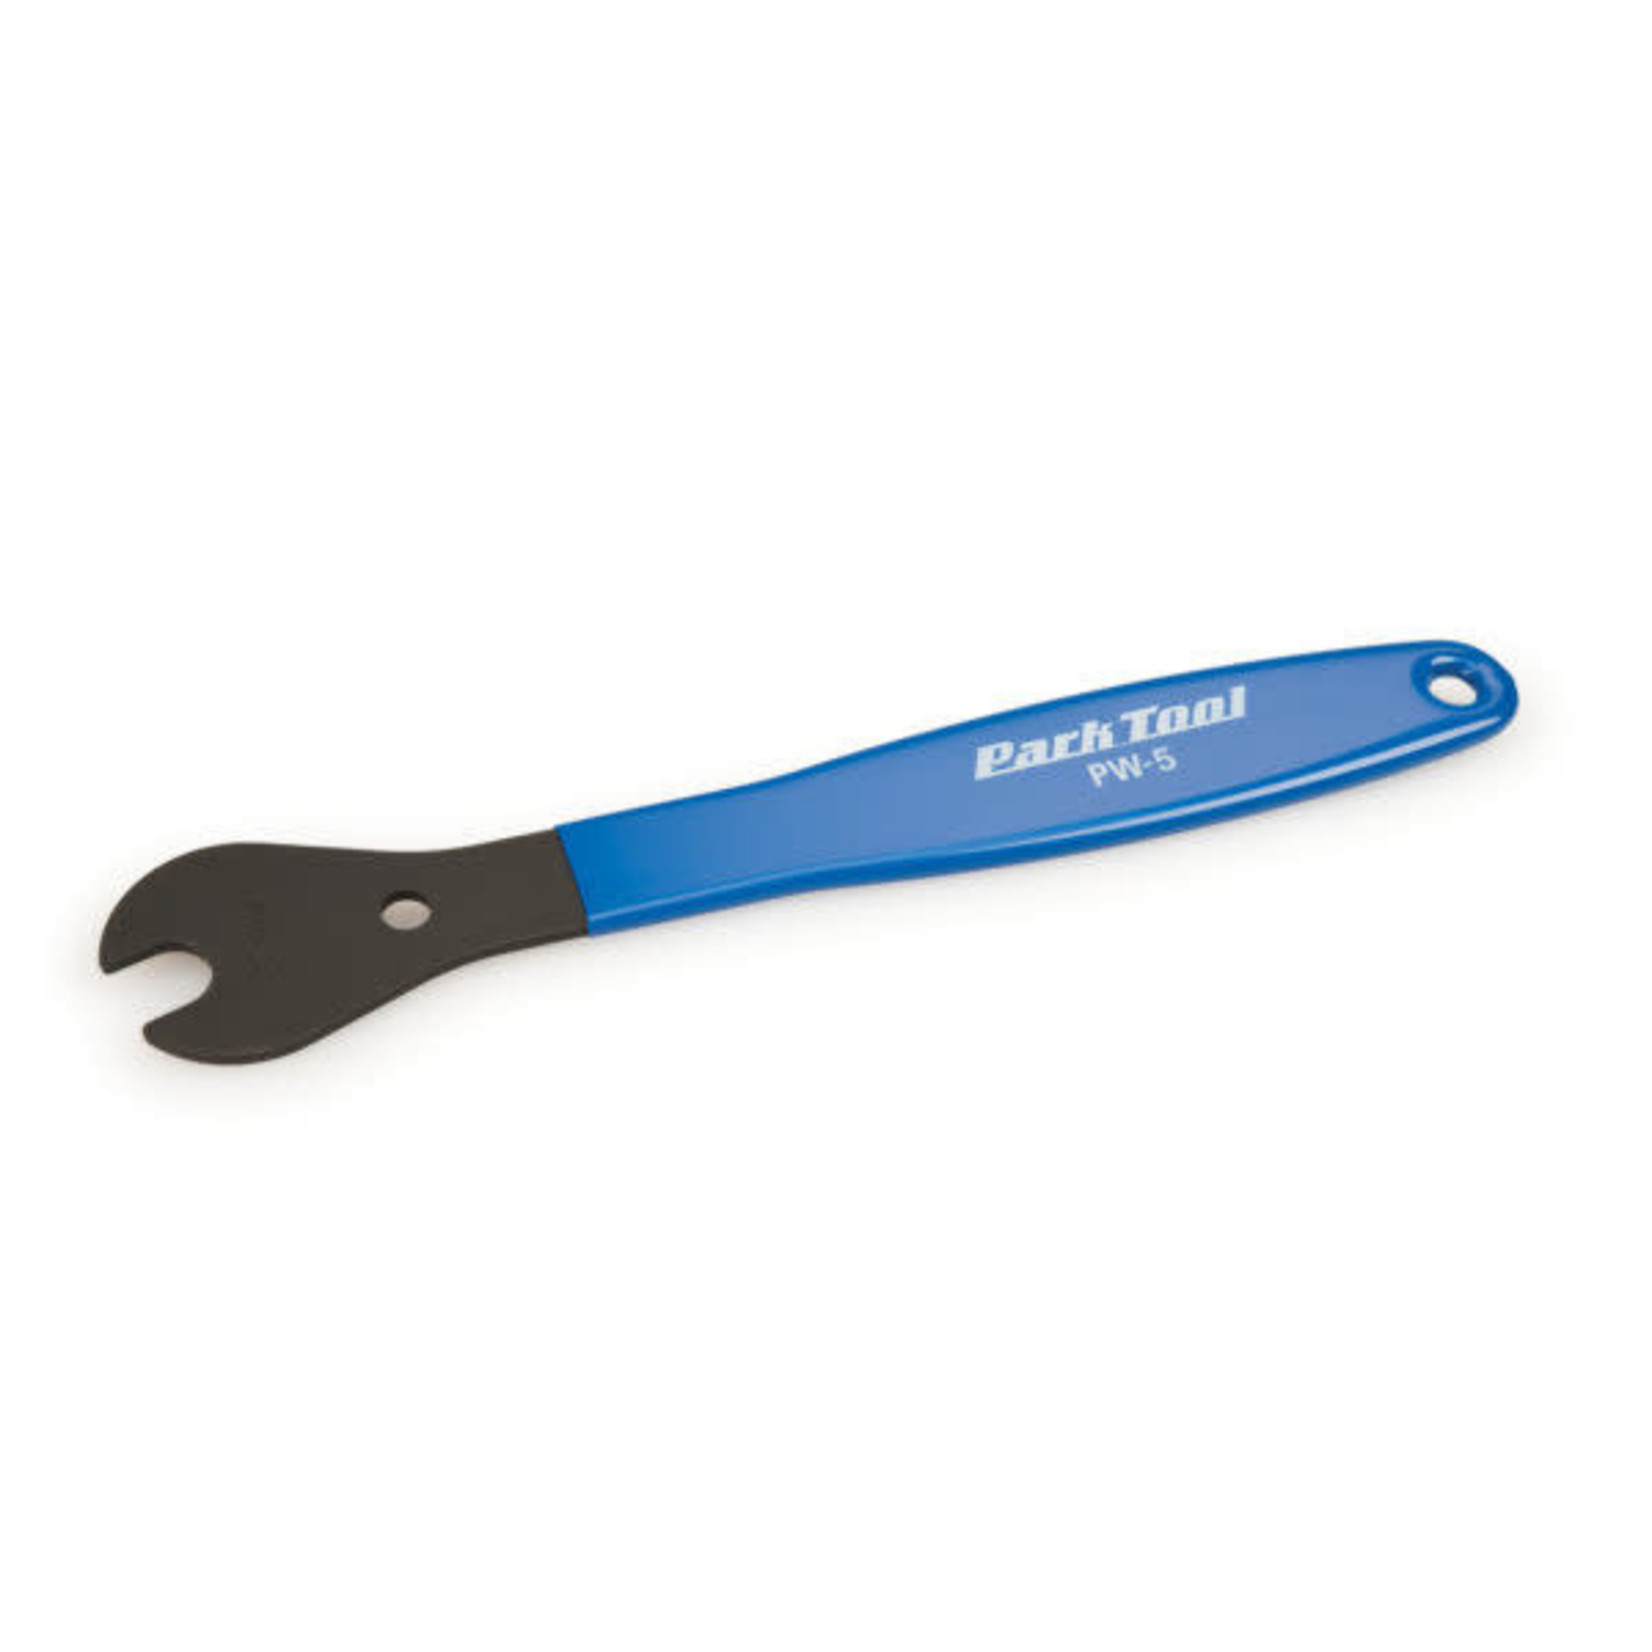 Park Tool Park Tool, PW-5, Light duty pedal wrench